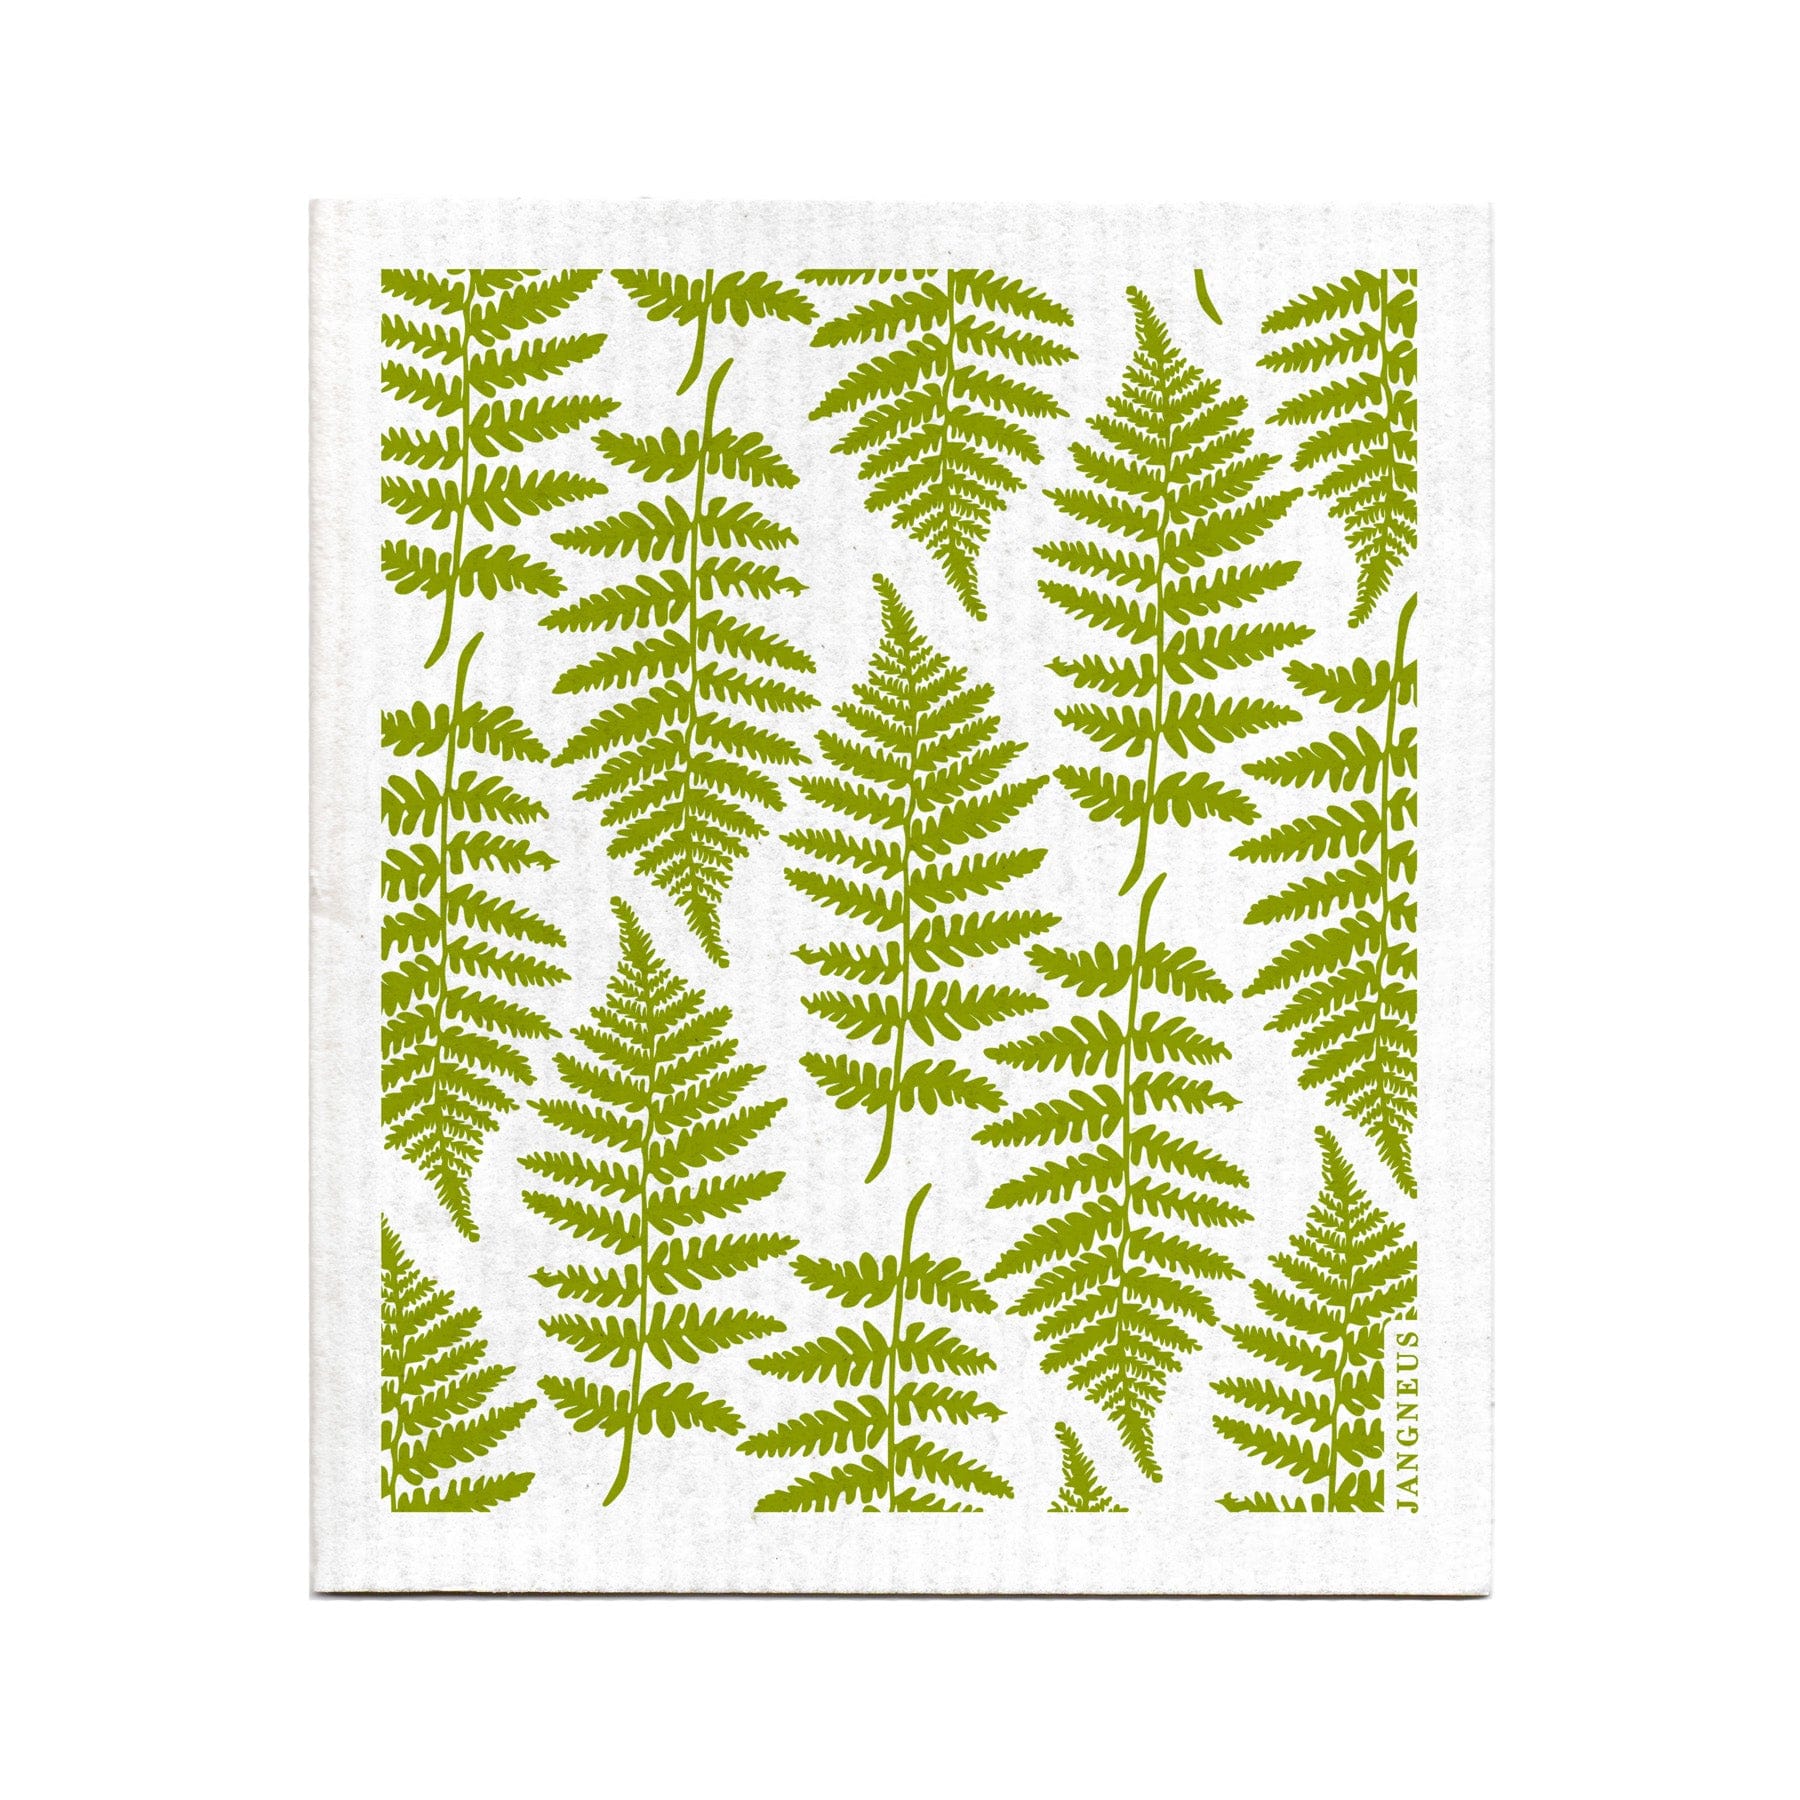 Green fern pattern on white background, botanical print, nature-inspired textile design, home decor fabric, leaf motif, eco-friendly material concept, artistic plant illustration